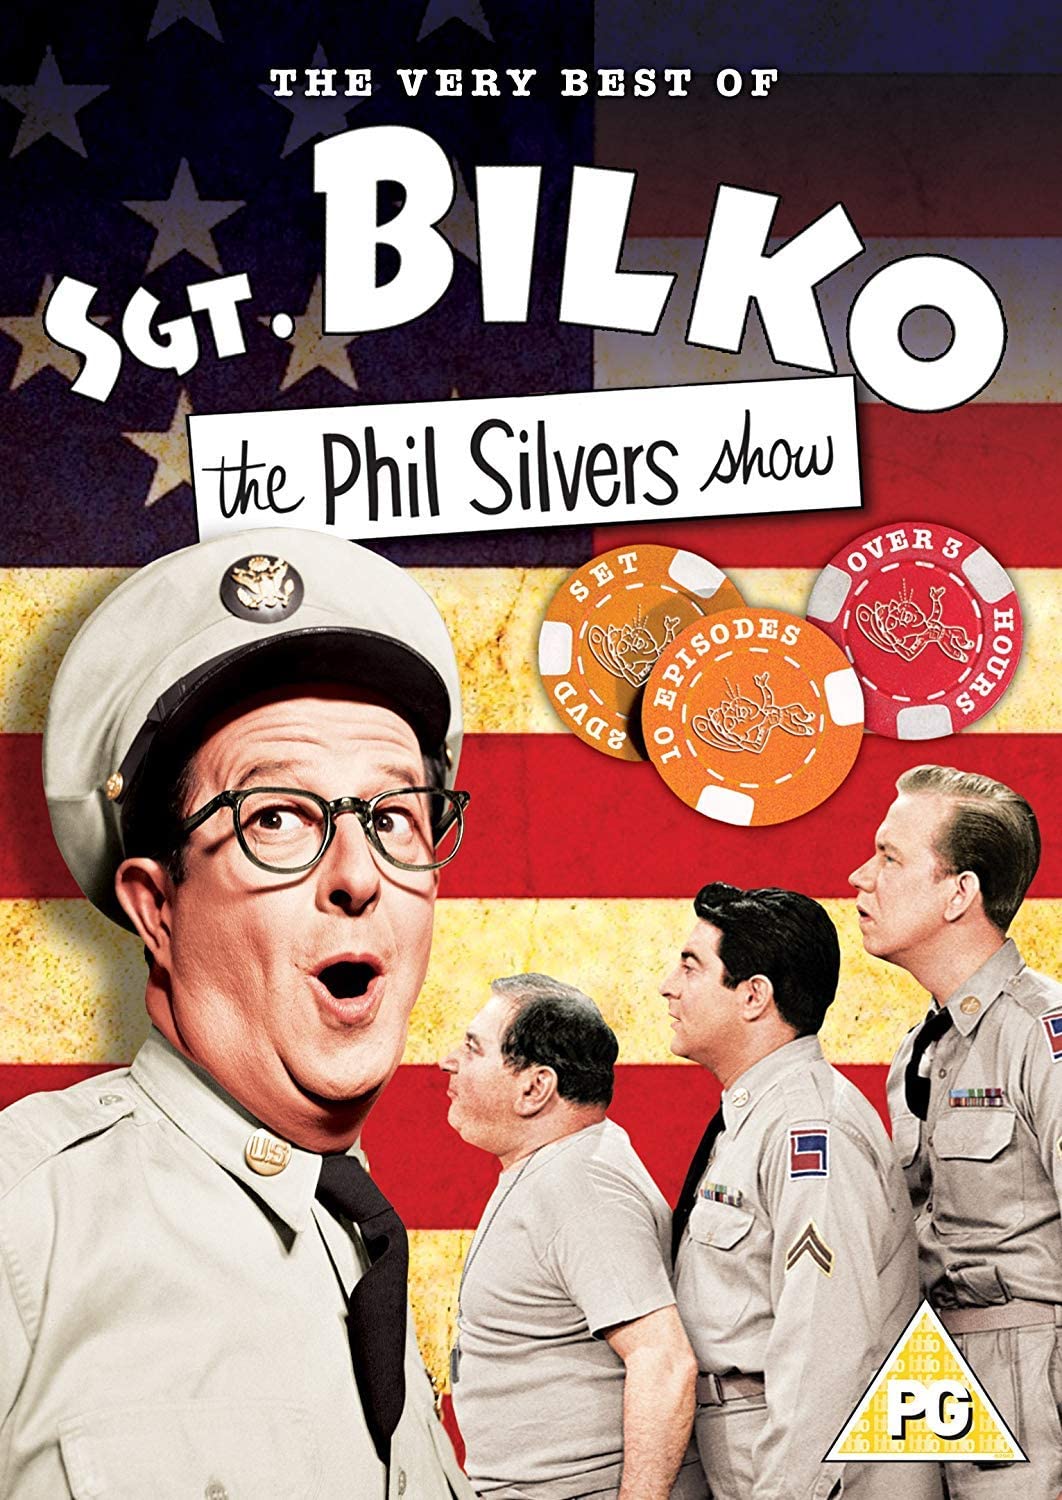 Sgt. Bilko - The Phil Silvers Show: The Very Best Of Set) - Comedy [DVD]